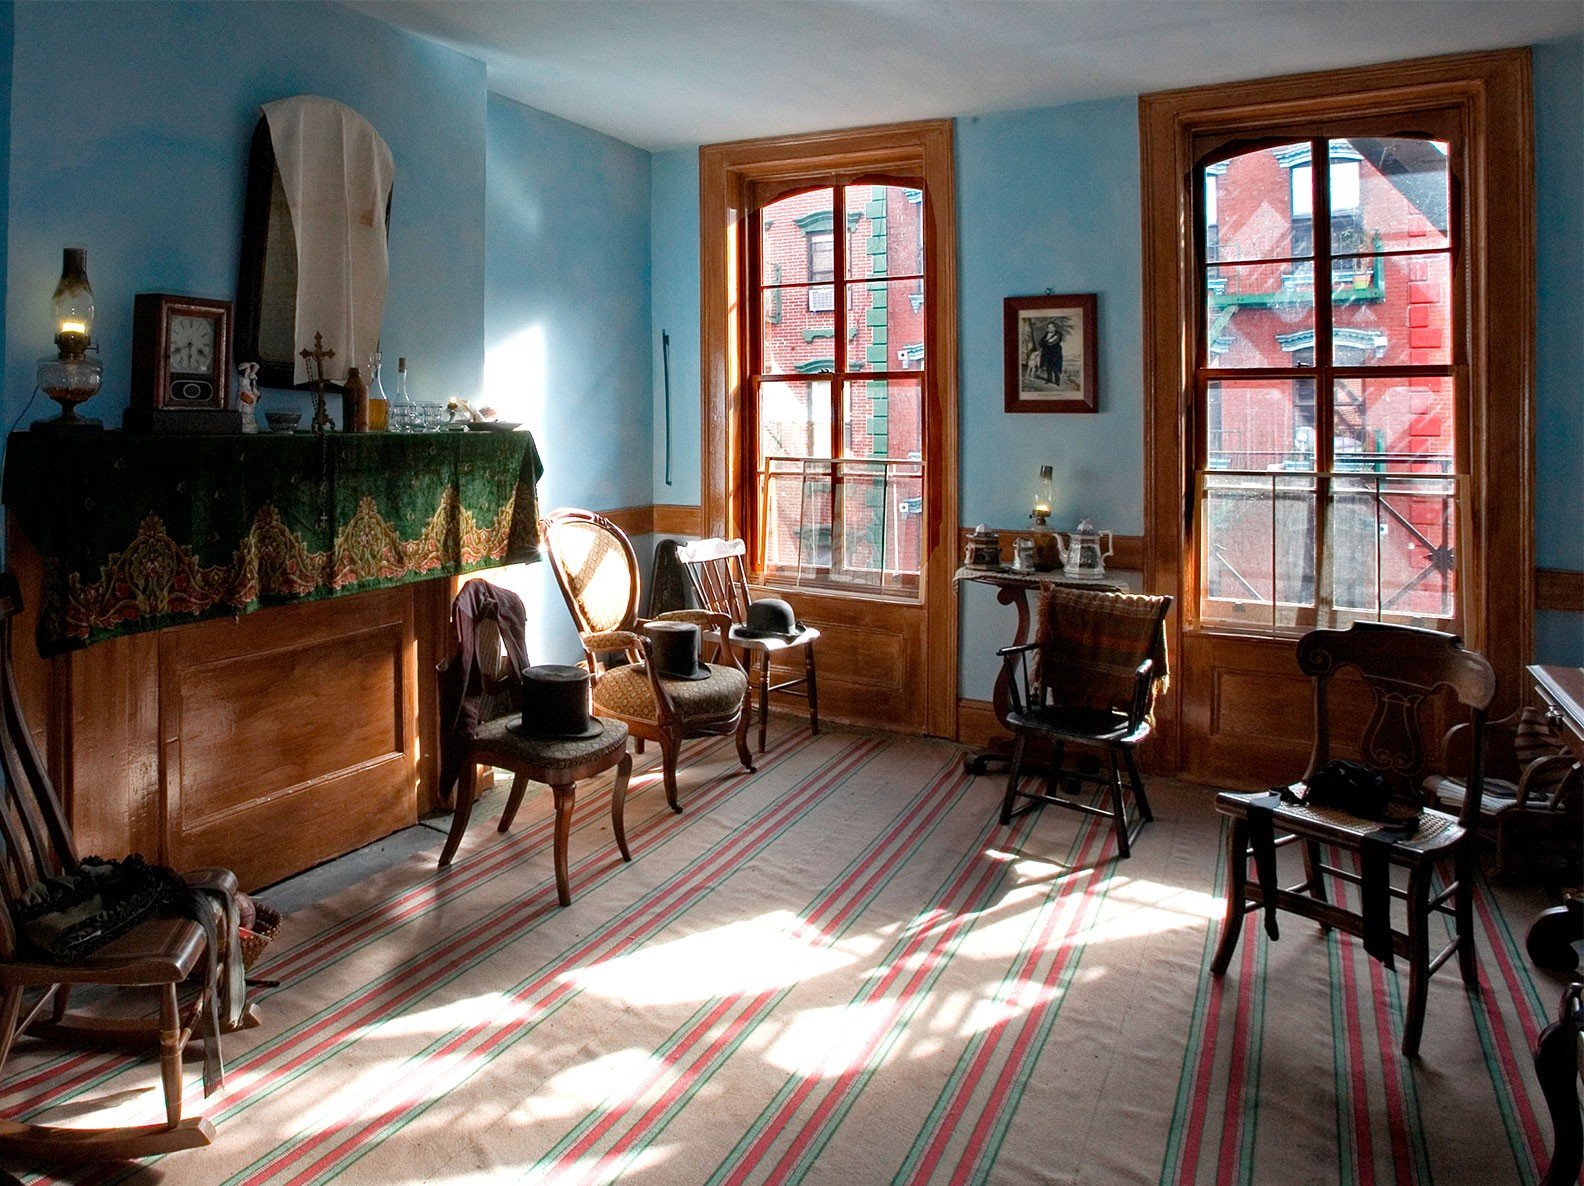 1869 parlor inside the Moore family's recreated apartment